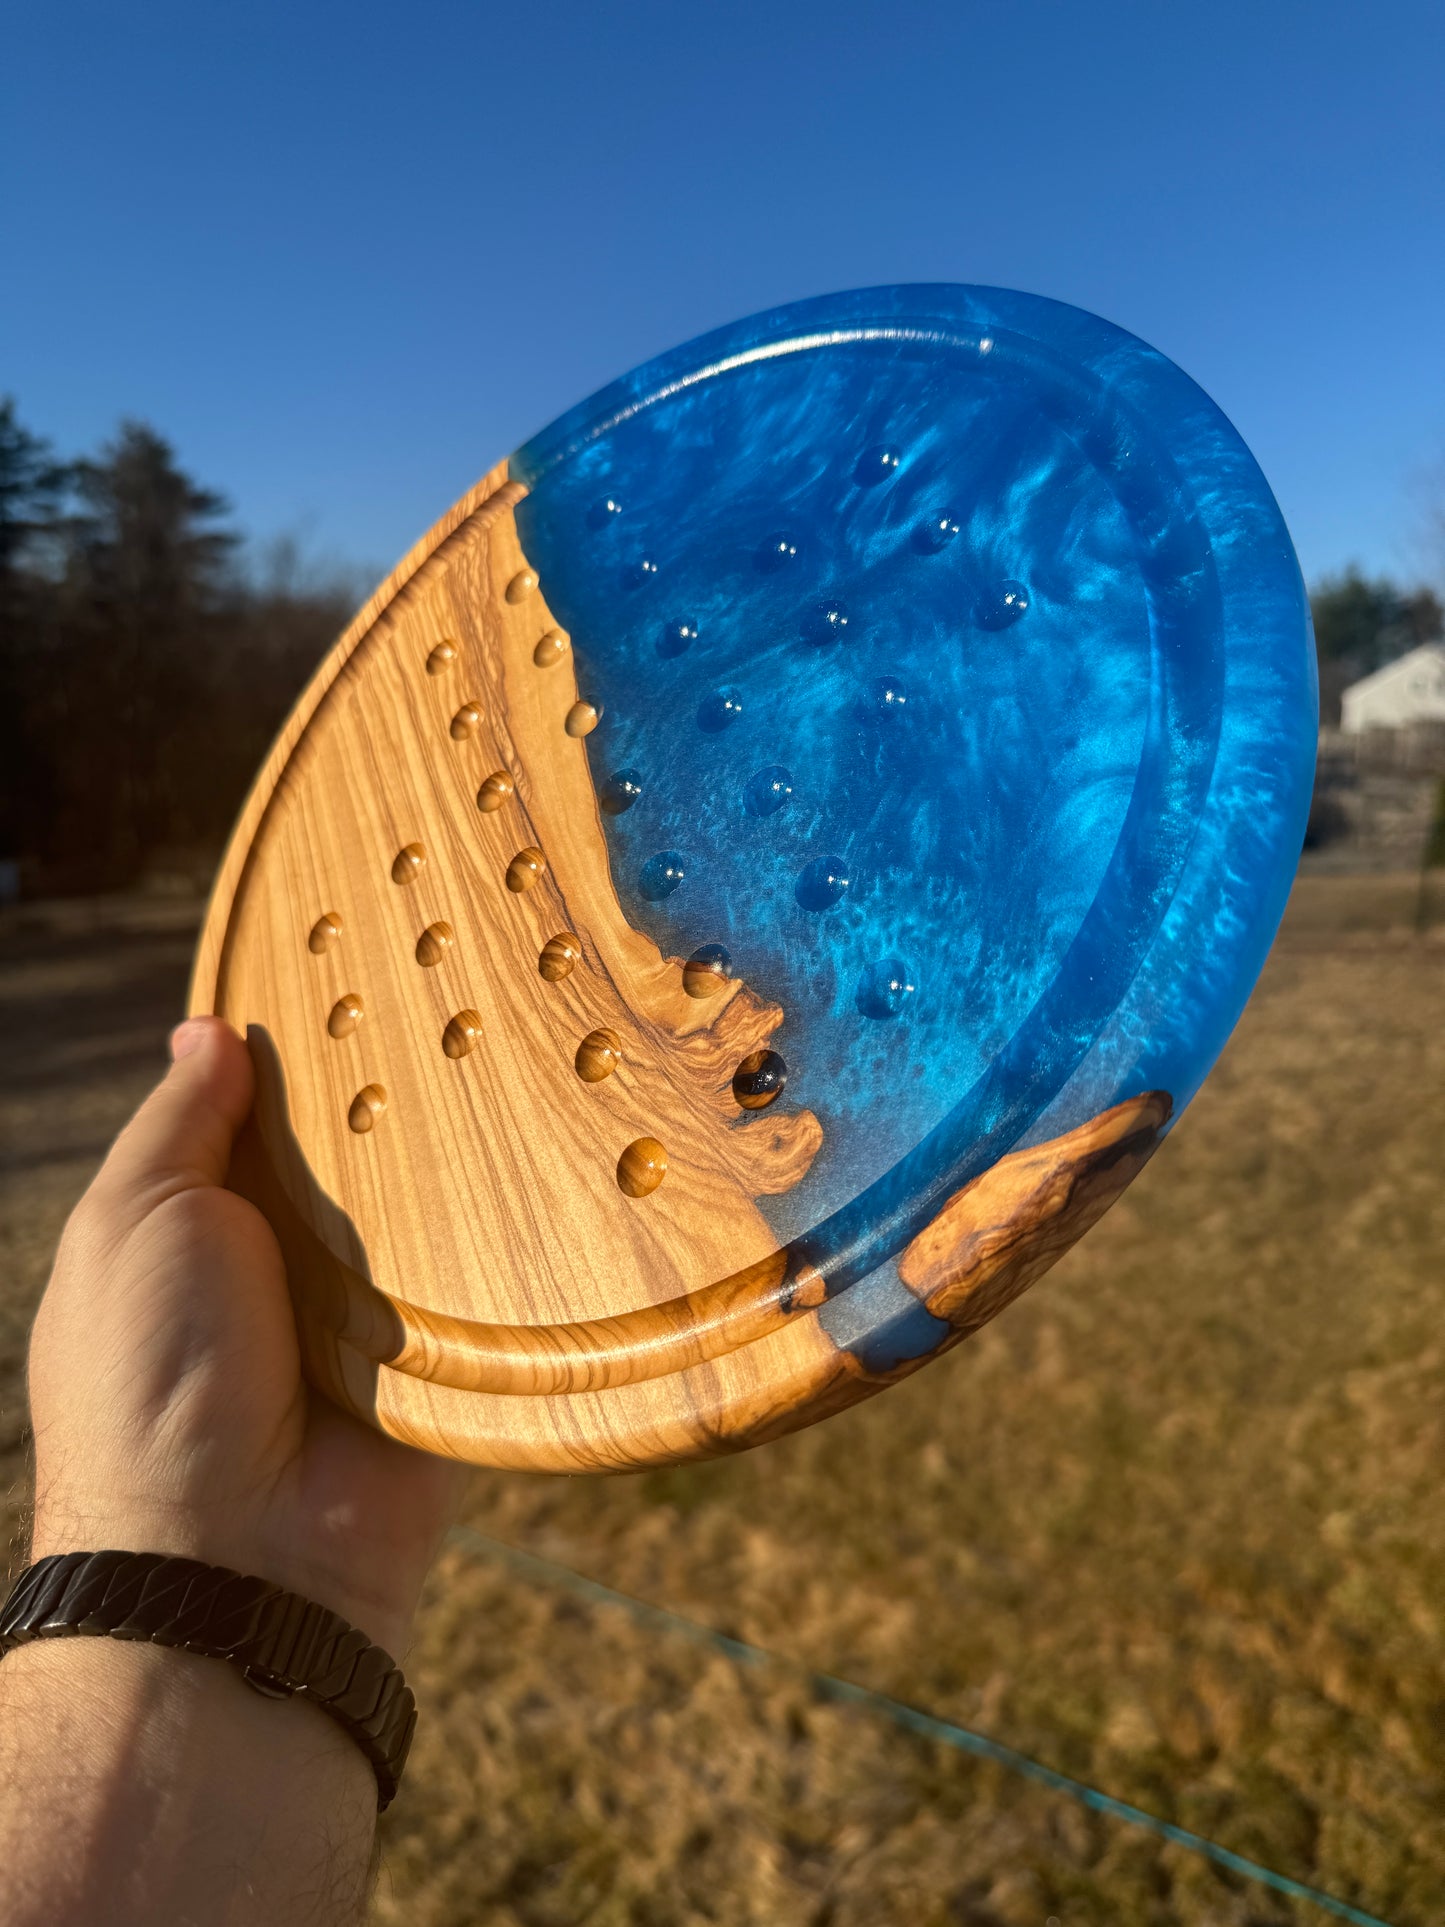 Deluxe Solitaire Board - Olive wood and blue resin